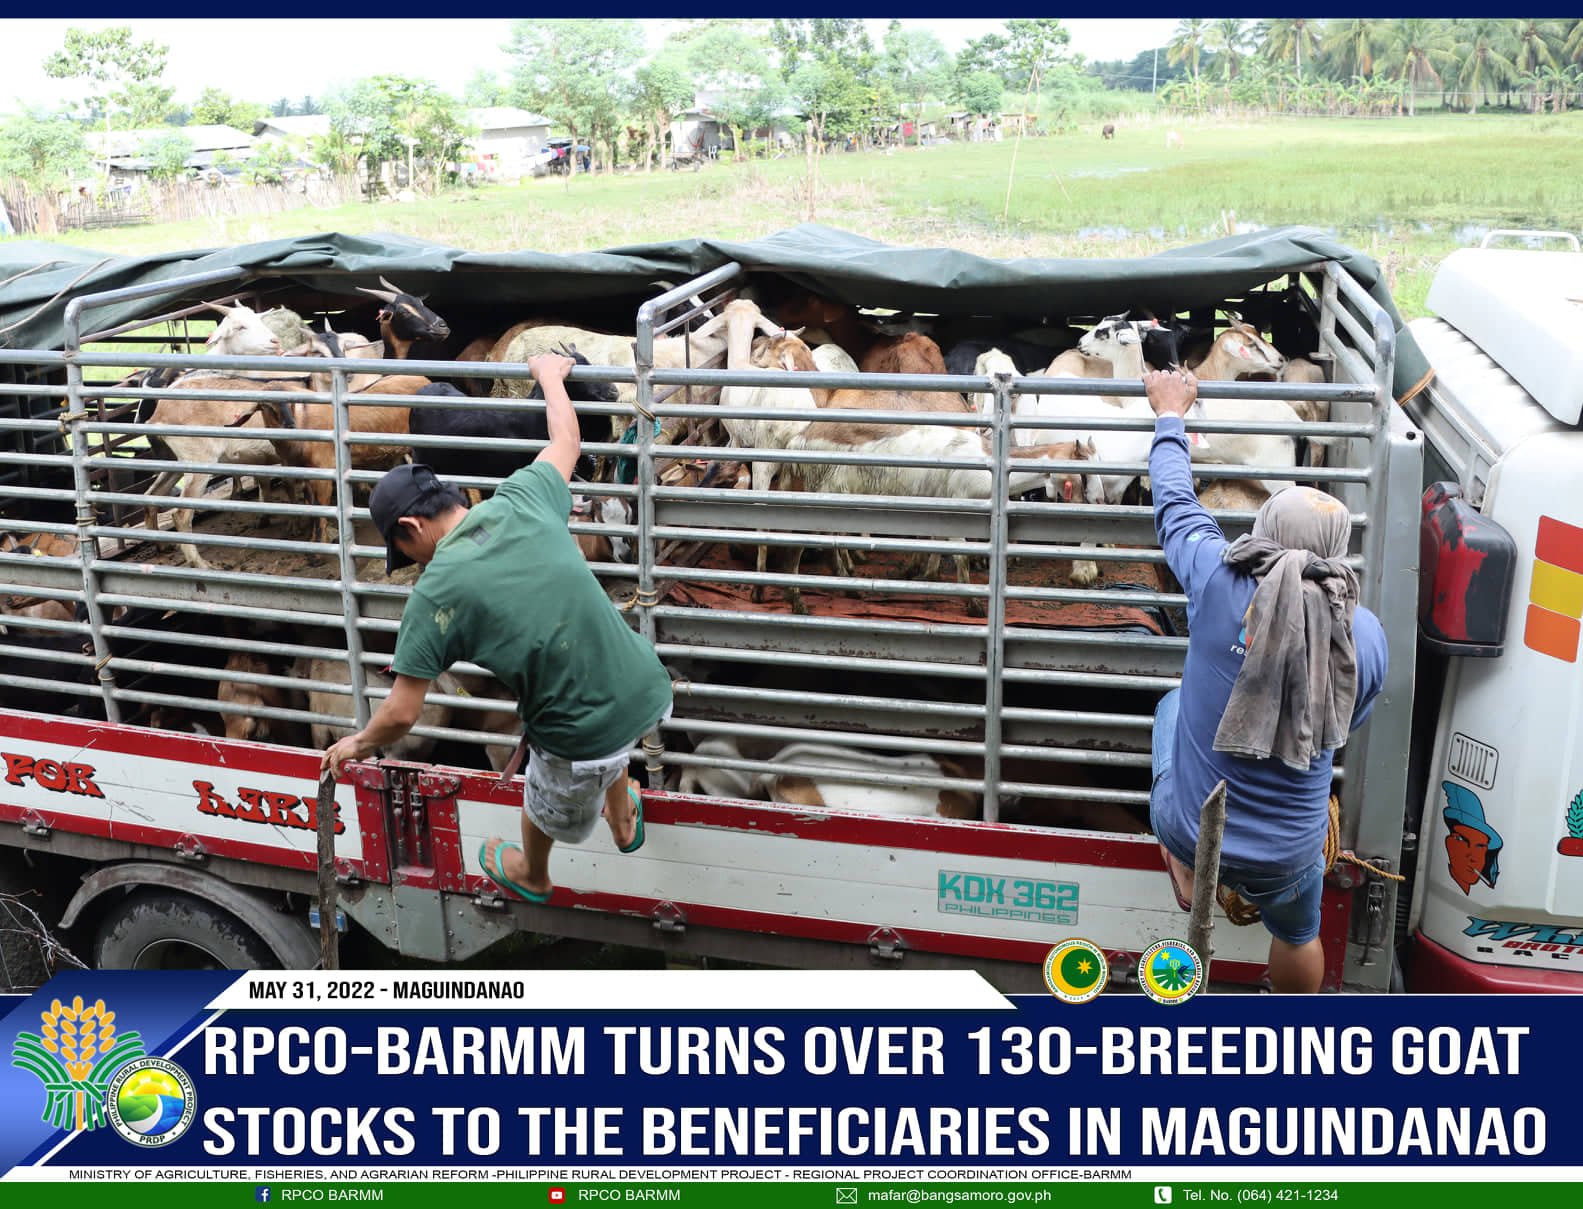 RPCO-BARMM turns over 130-breeding goat stocks to the beneficiaries in Maguindanao